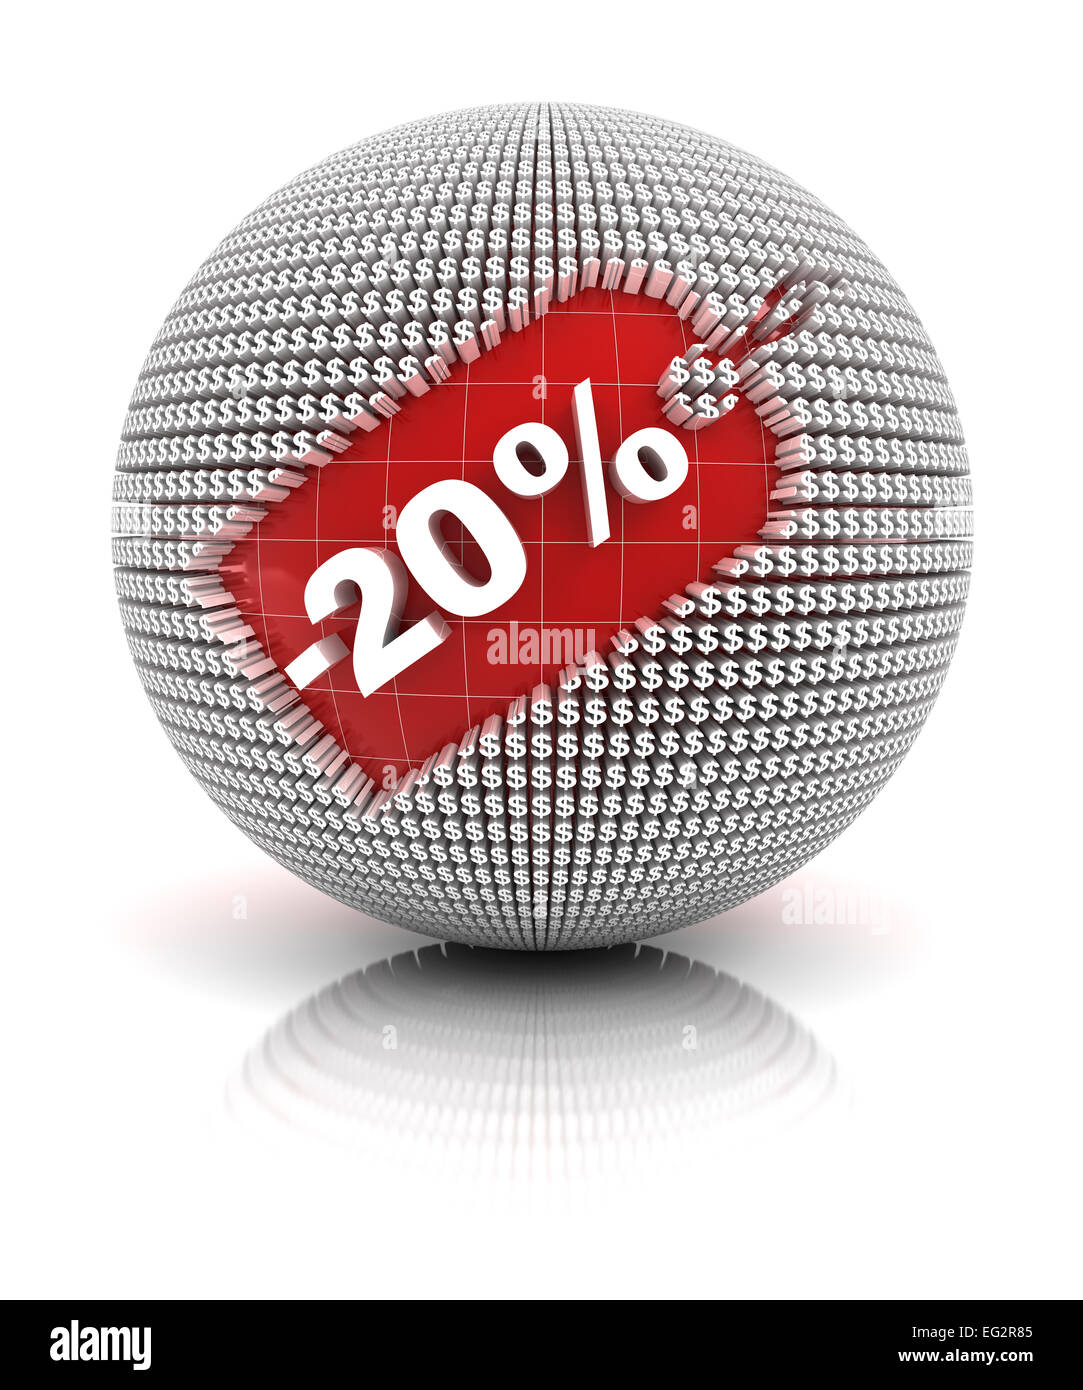 20 percent off sale tag on a sphere Stock Photo